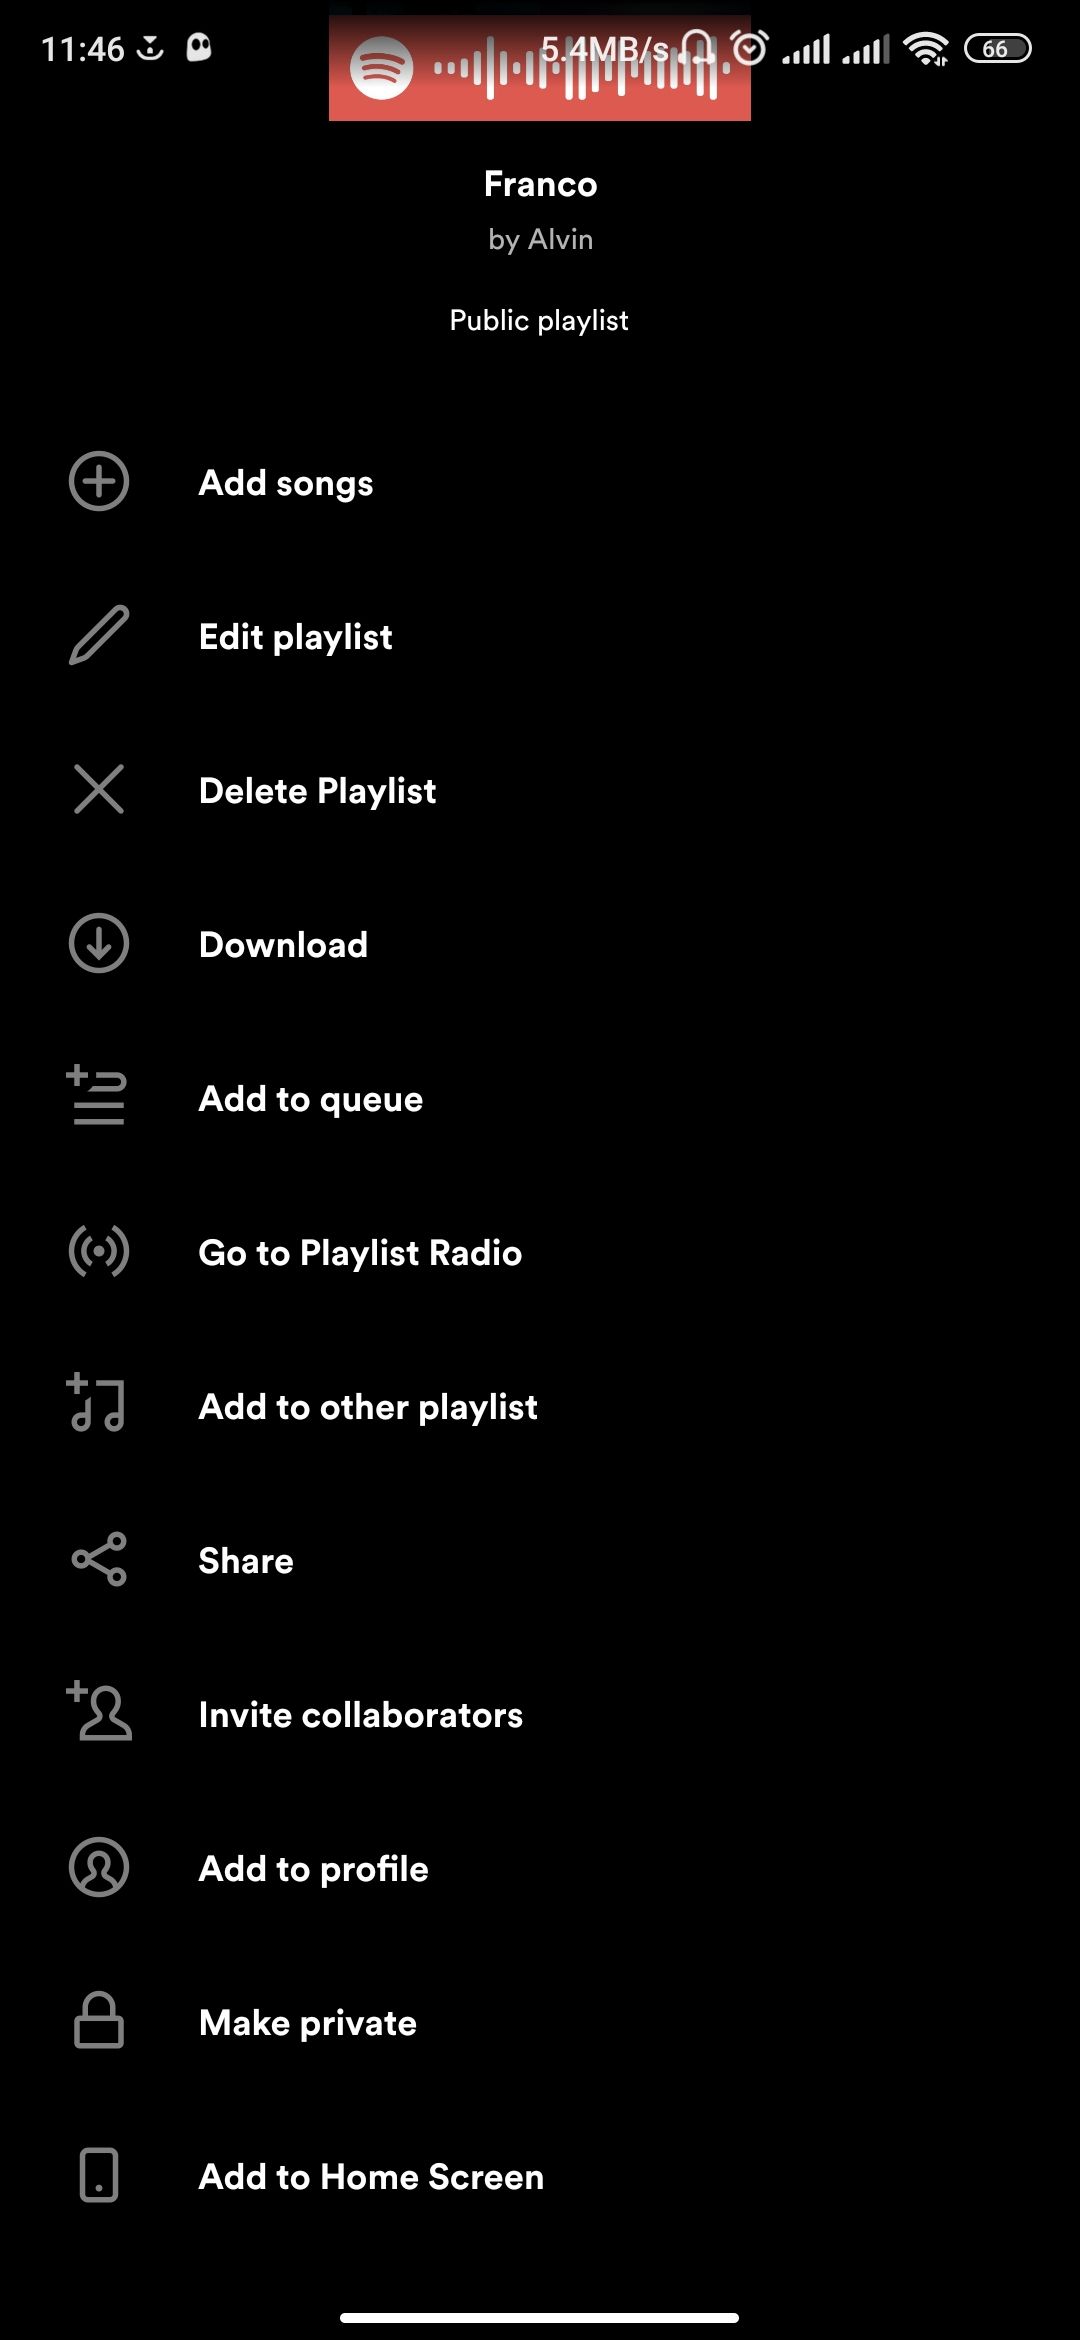 More options menu on Spotify's mobile app